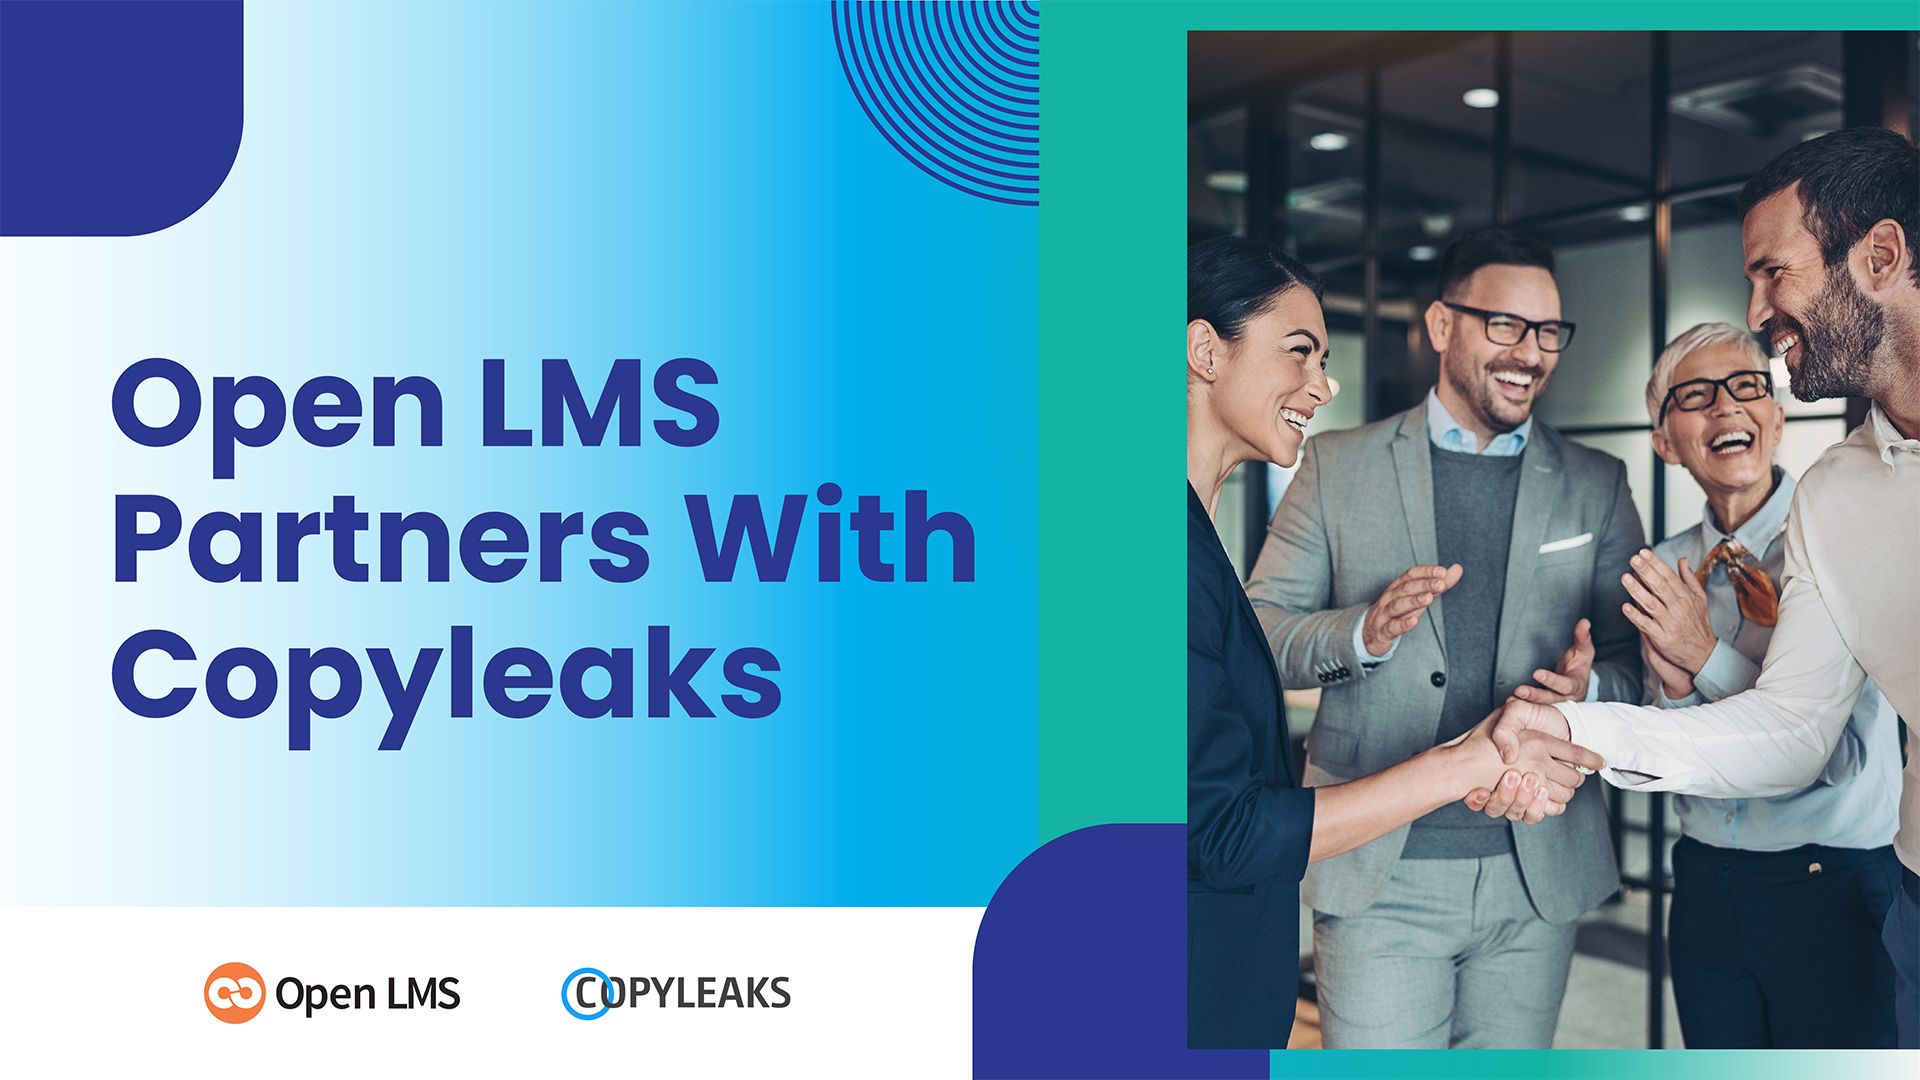 Open LMS Partners With Copyleaks, Adding Advanced AI-driven Plagiarism and AI Content Detection